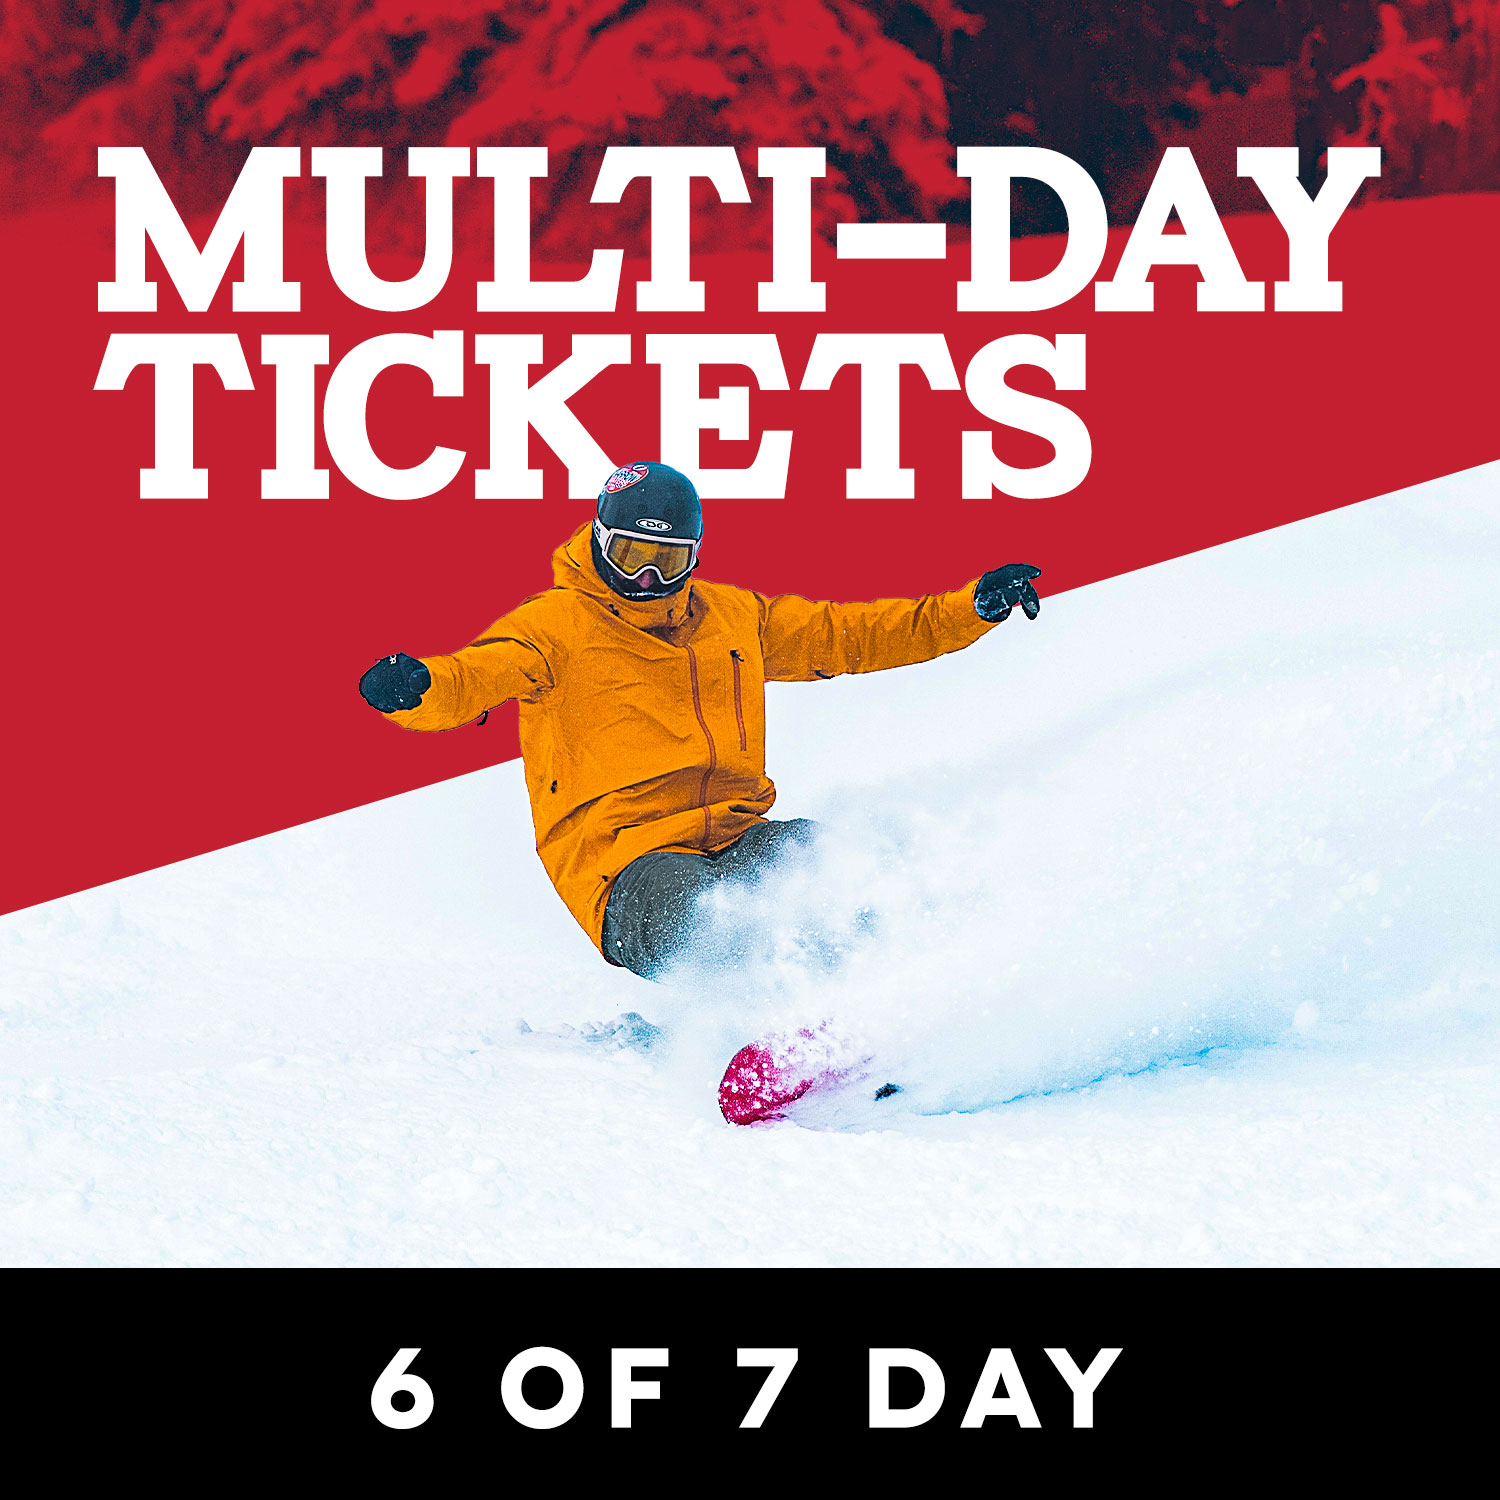 6 of 7 Day Ticket